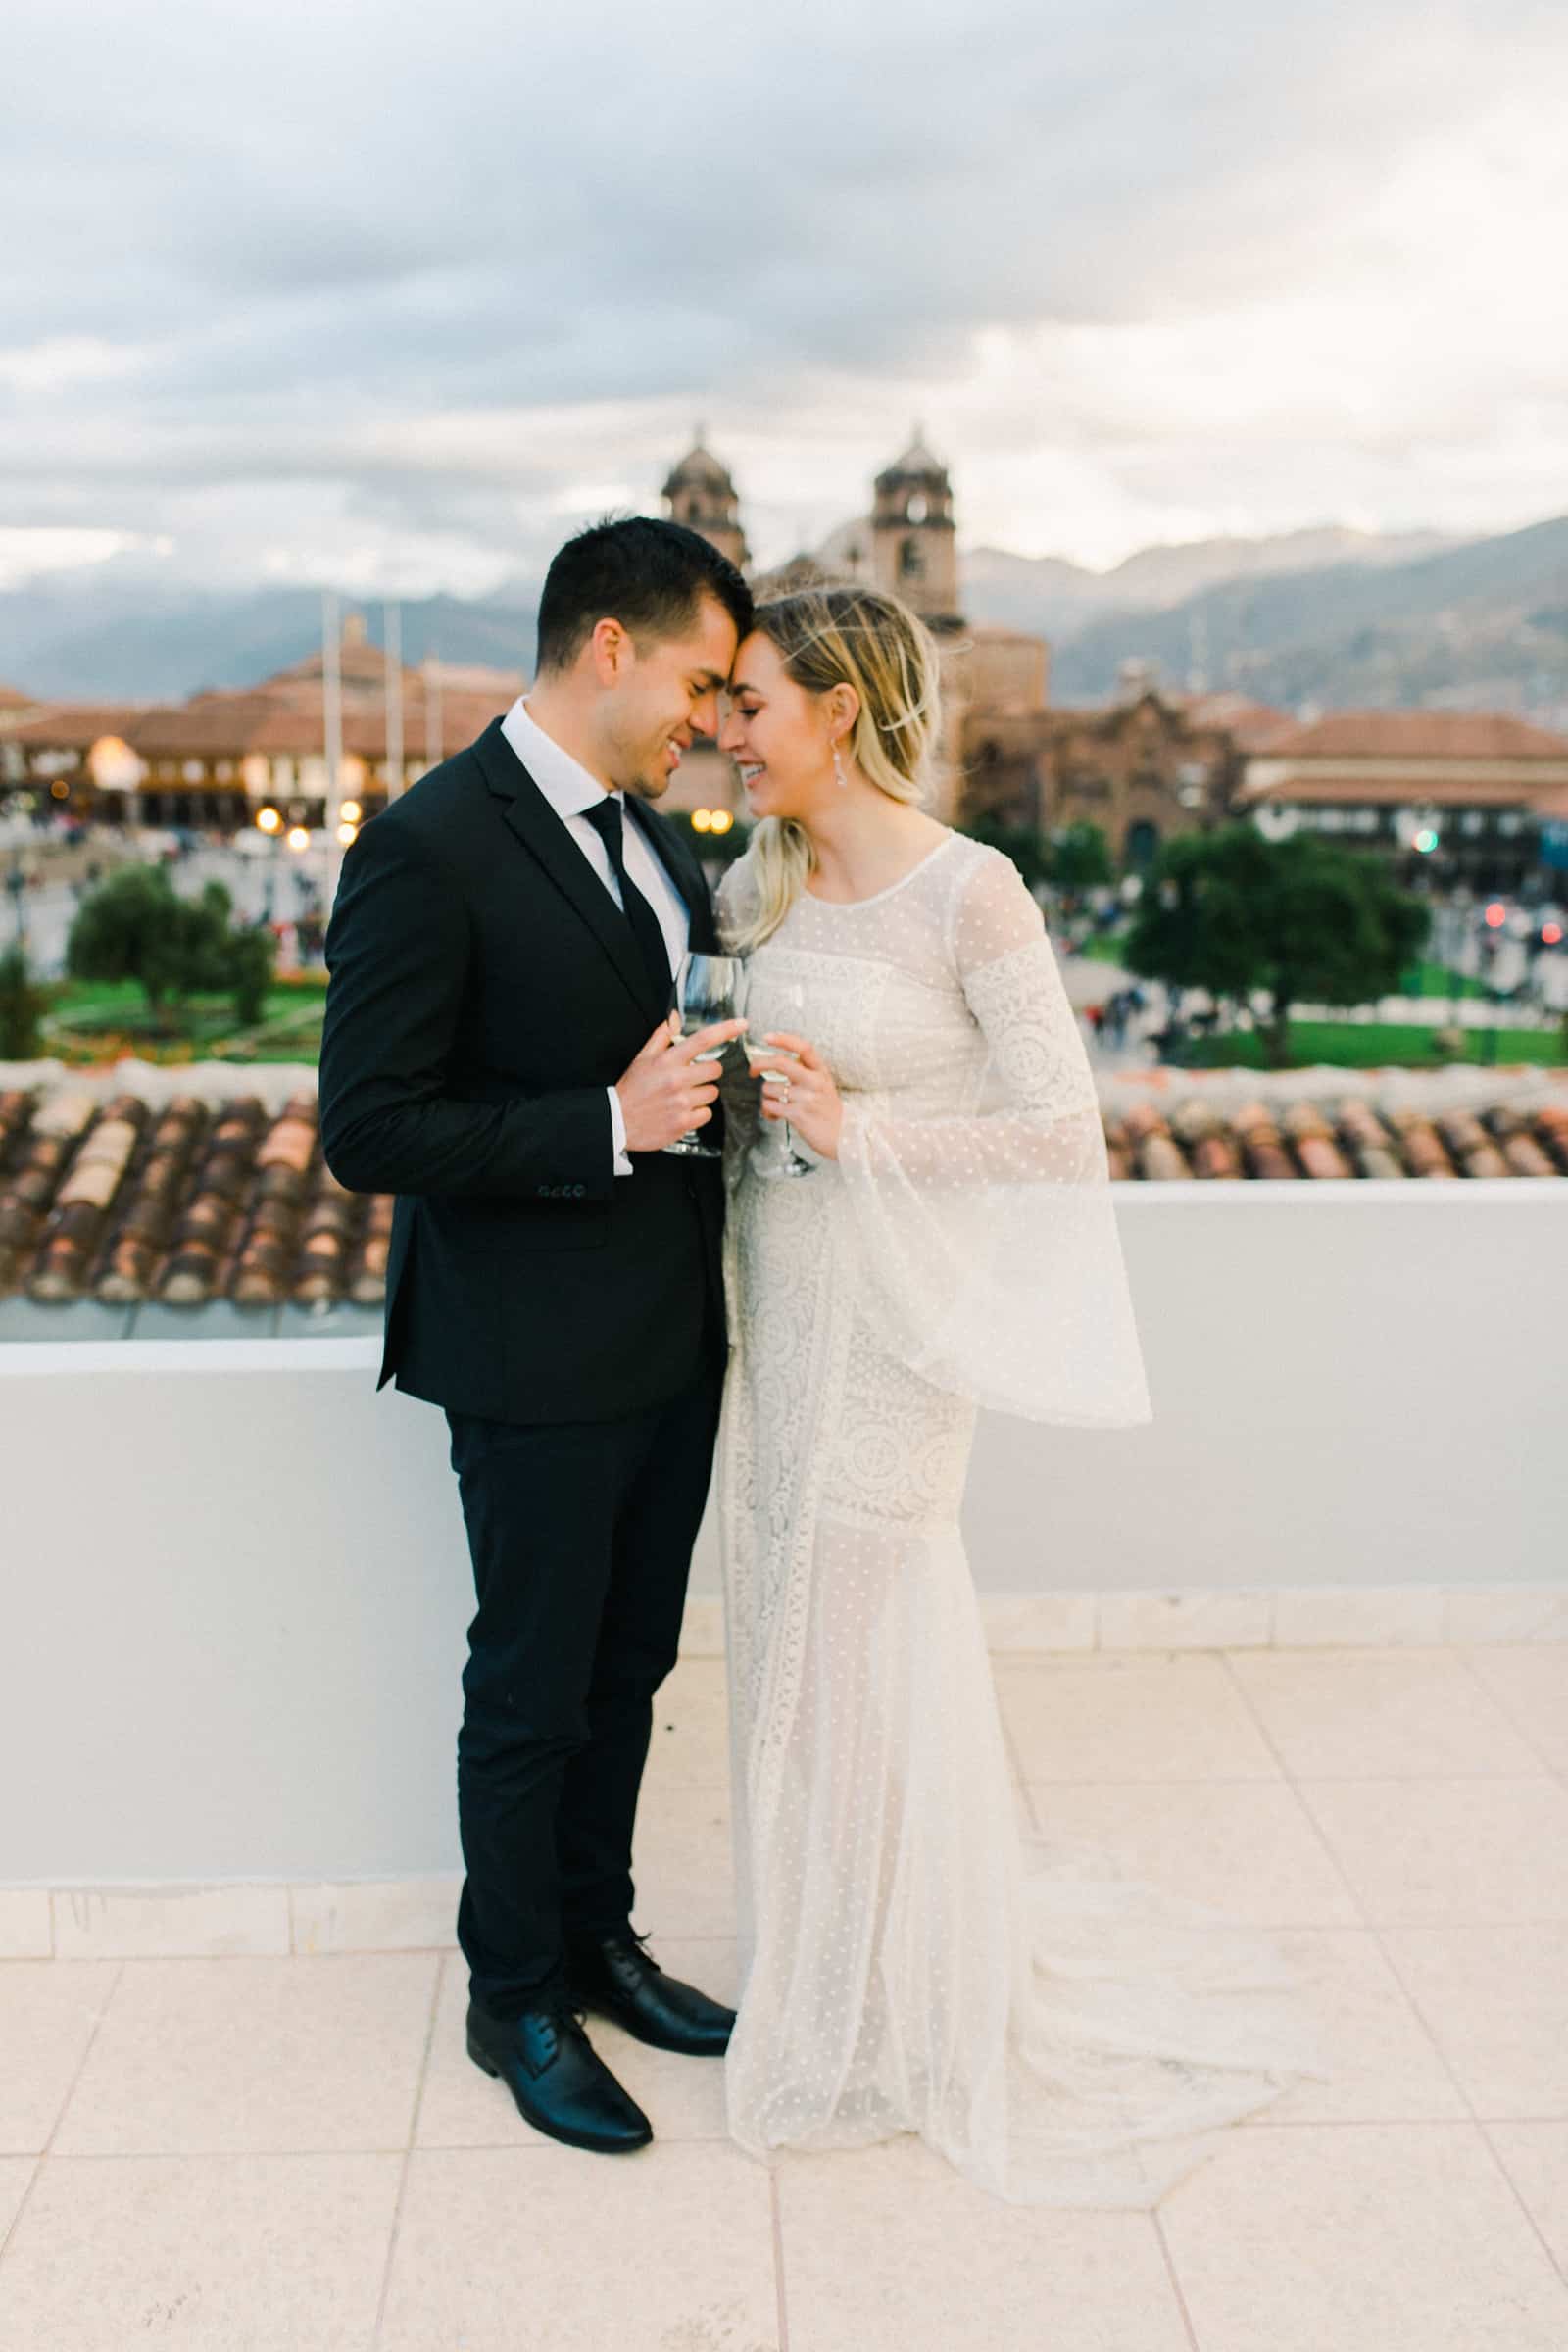 Cusco Peru Destination Wedding Inspiration, travel photography, bride and groom wedding dinner overlooking Cusco Cathedral , champagne toast